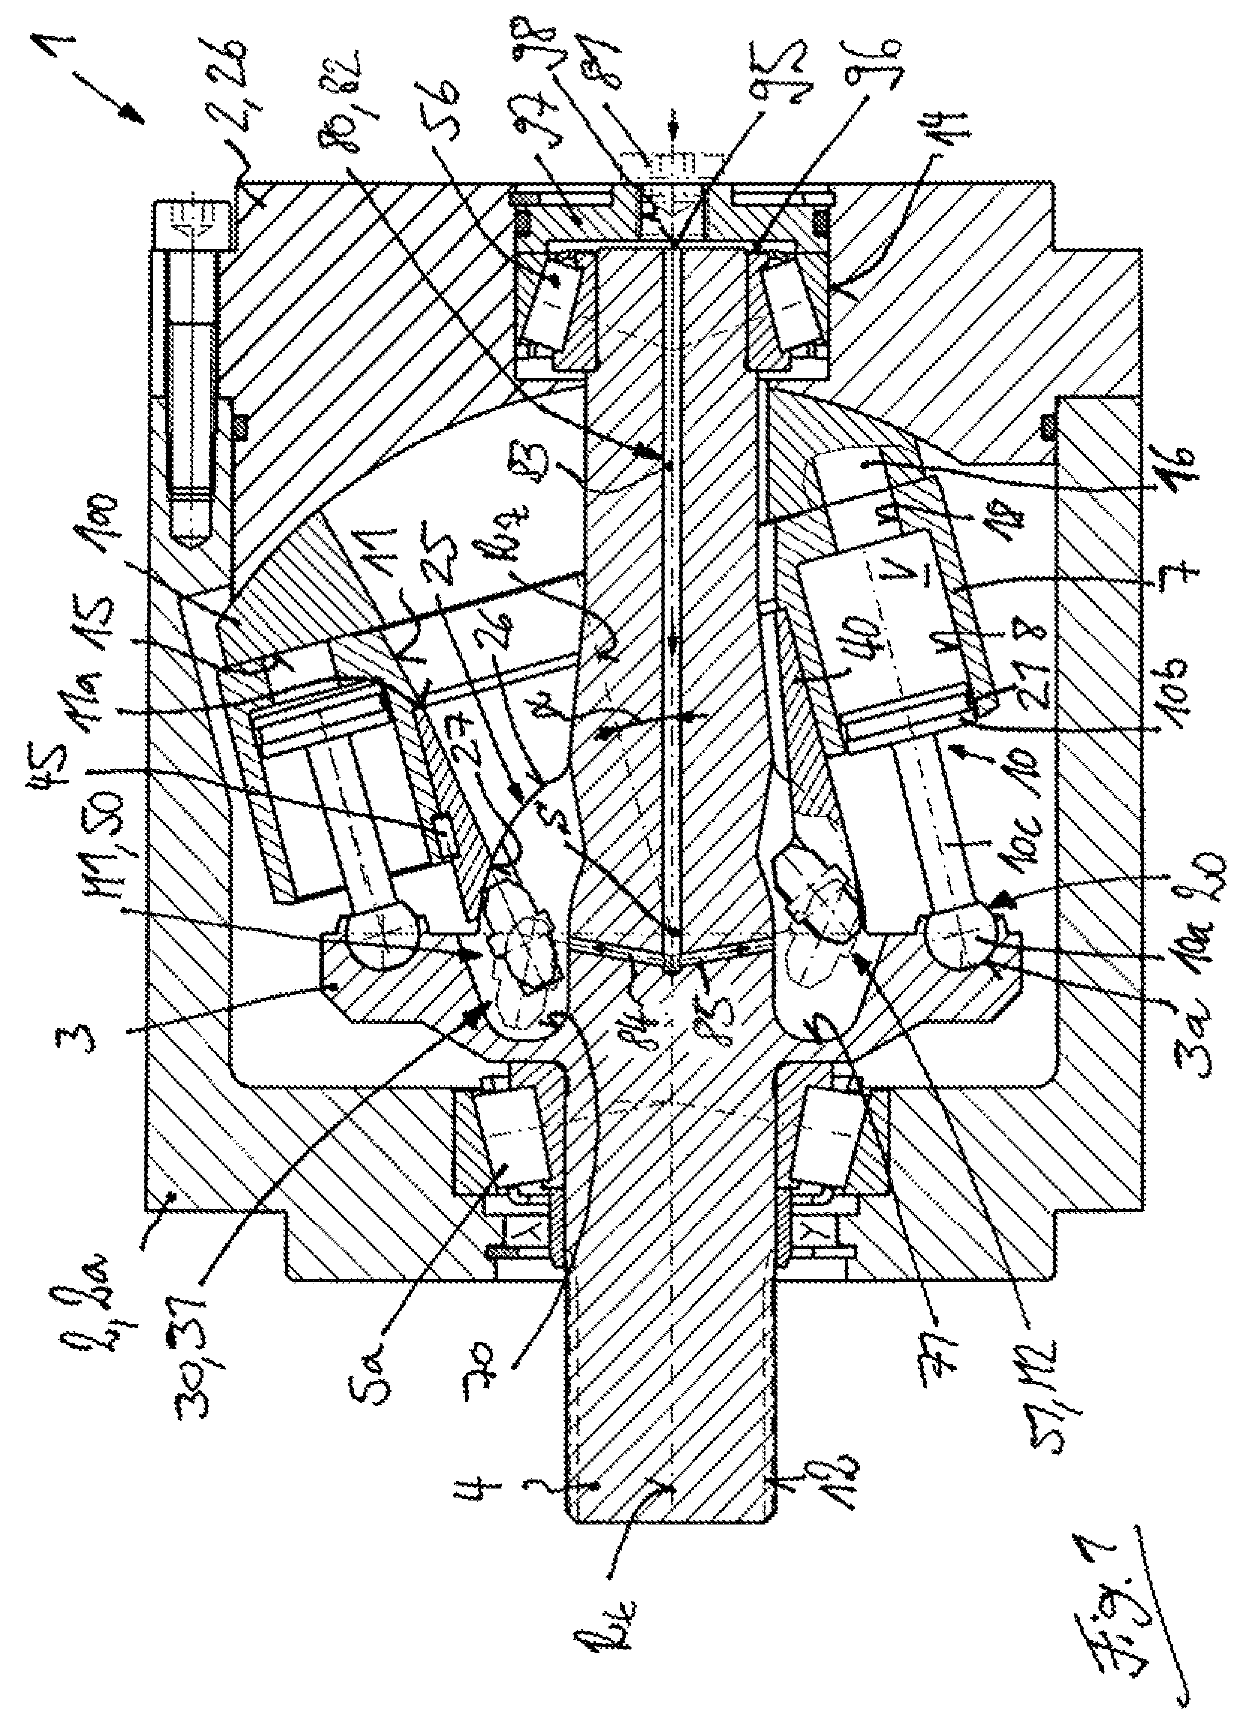 Axial piston machine utilizing a bent-axis construction with a drive joint for driving the cylinder barrel